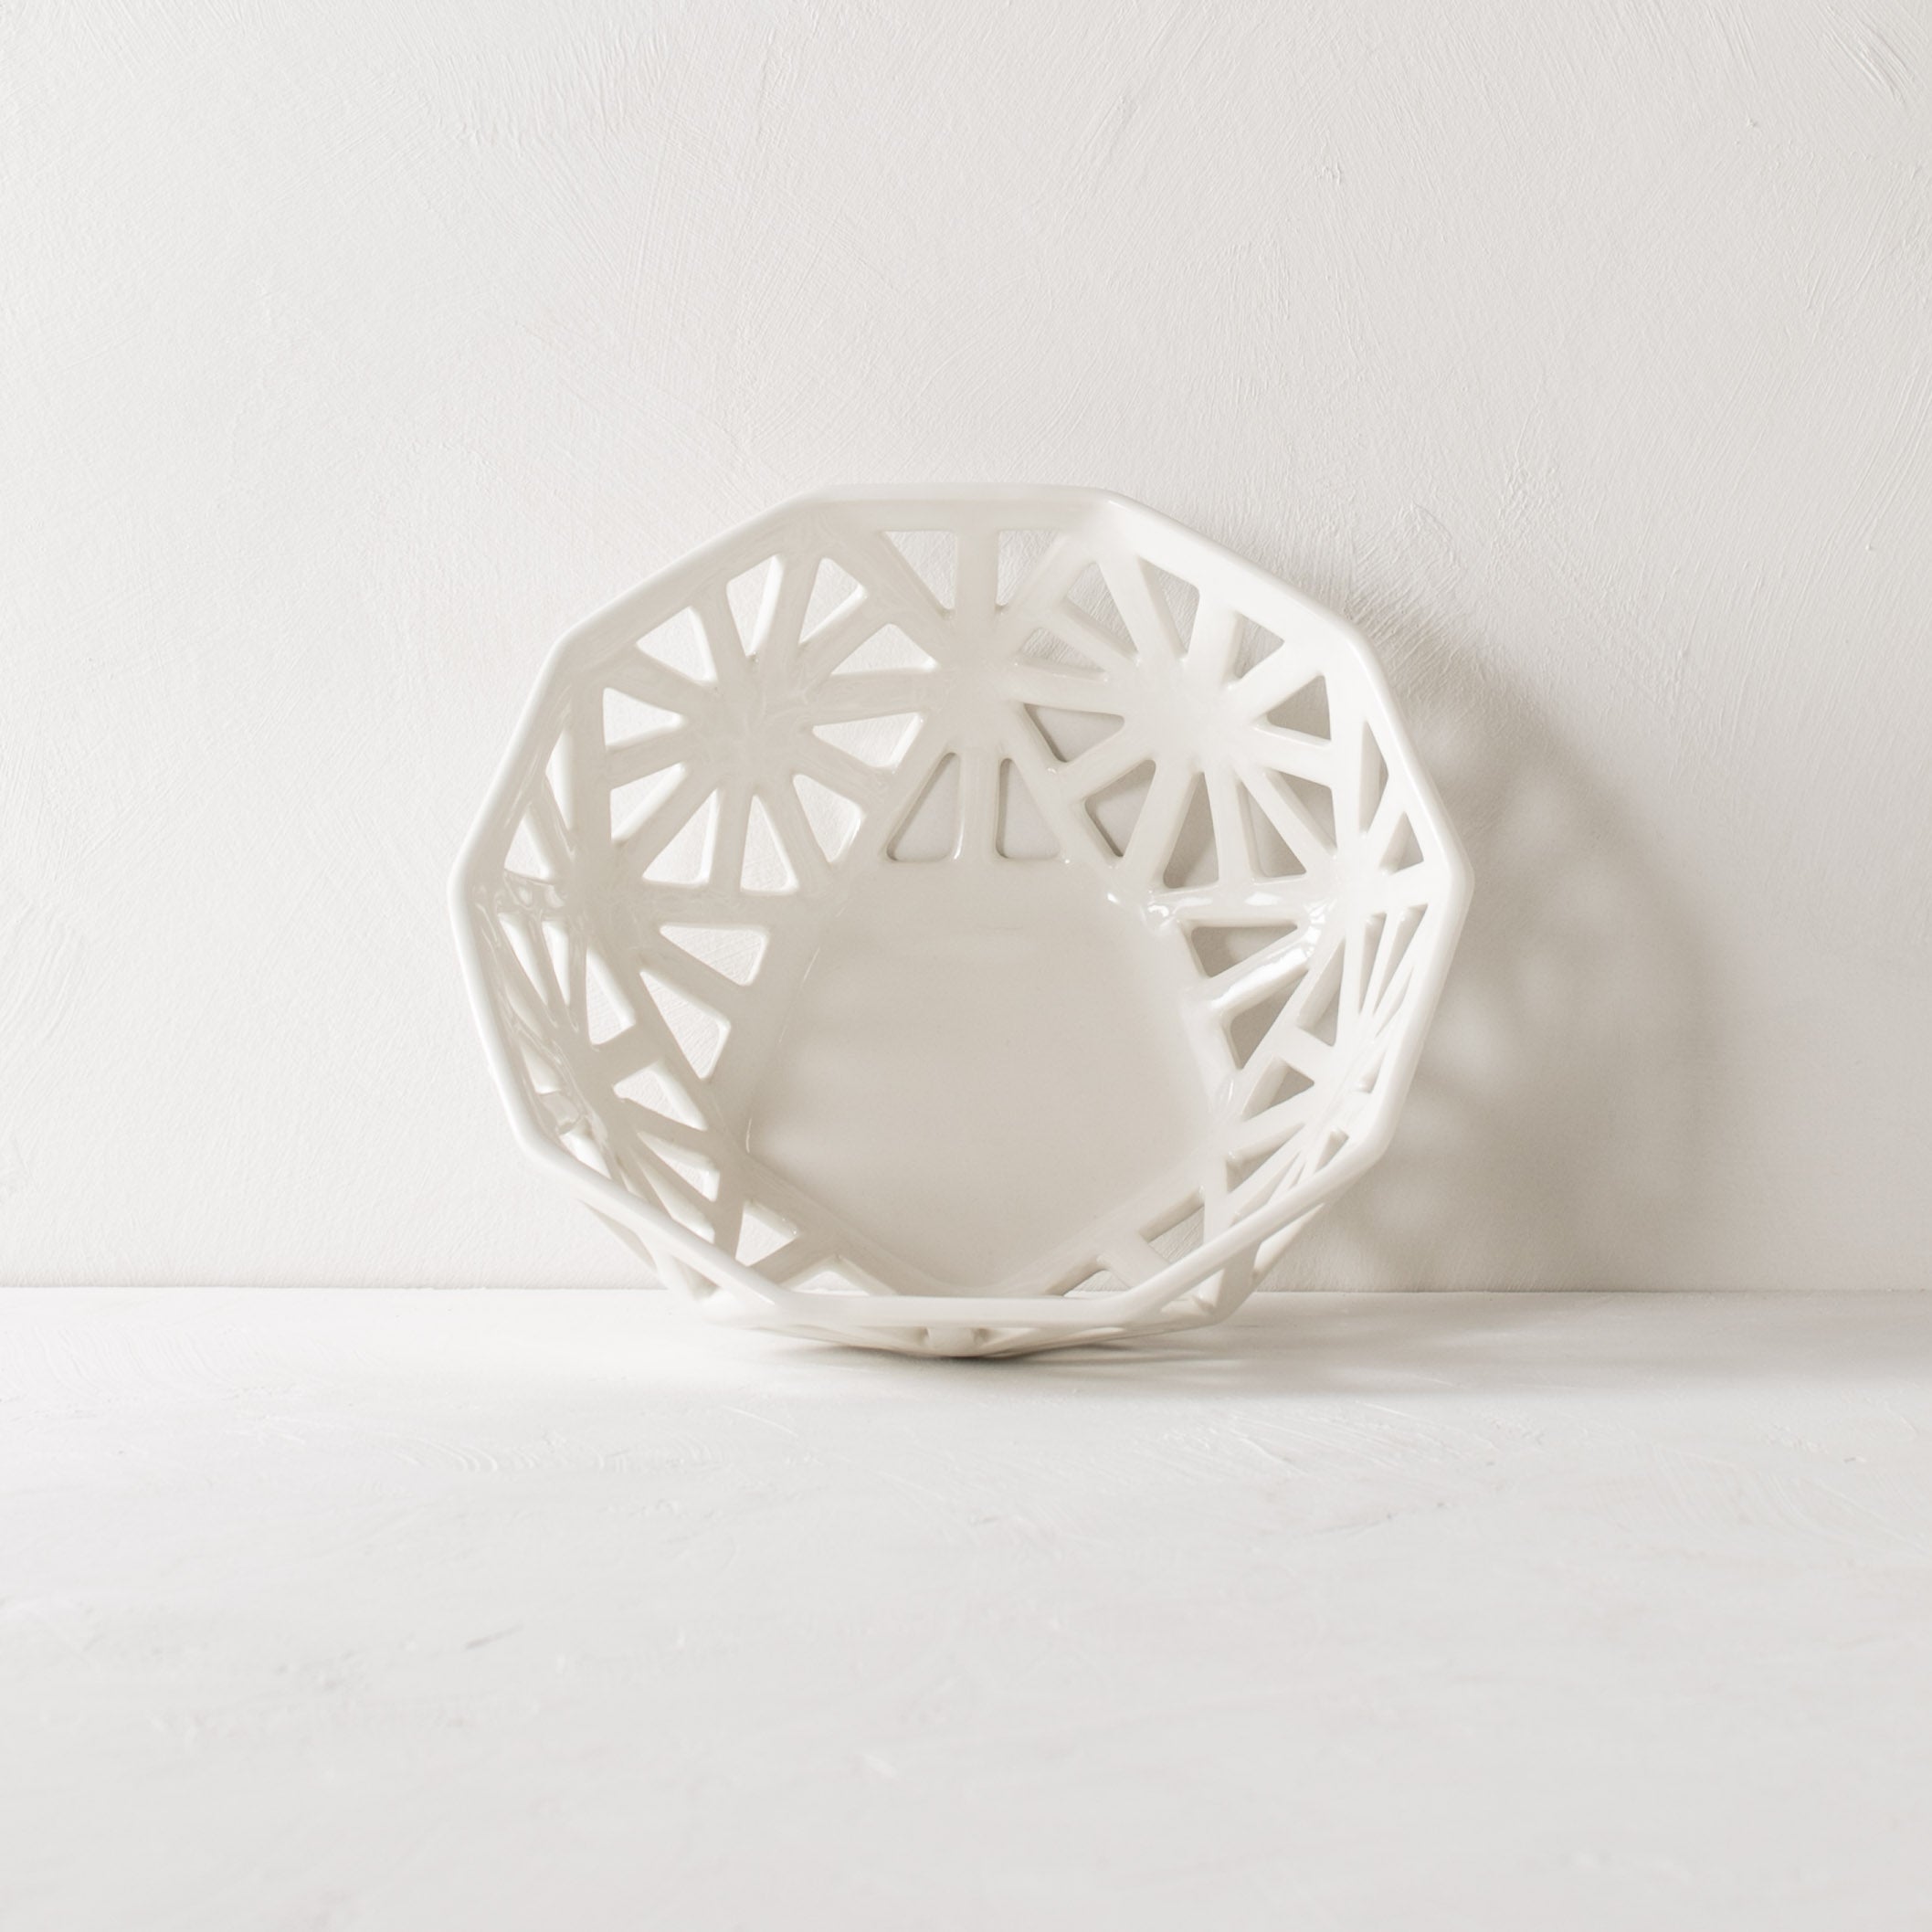 White geometric fruit bowl. Pentagon carved design with additional carved designs in the shape of slim right angle triangles. Staged on a white plaster table top and a white plaster textured wall. Fruit bowl is leaning against the wall upright to show the full overhead view. Designed and sold by Convivial Production, Kansas City Ceramics